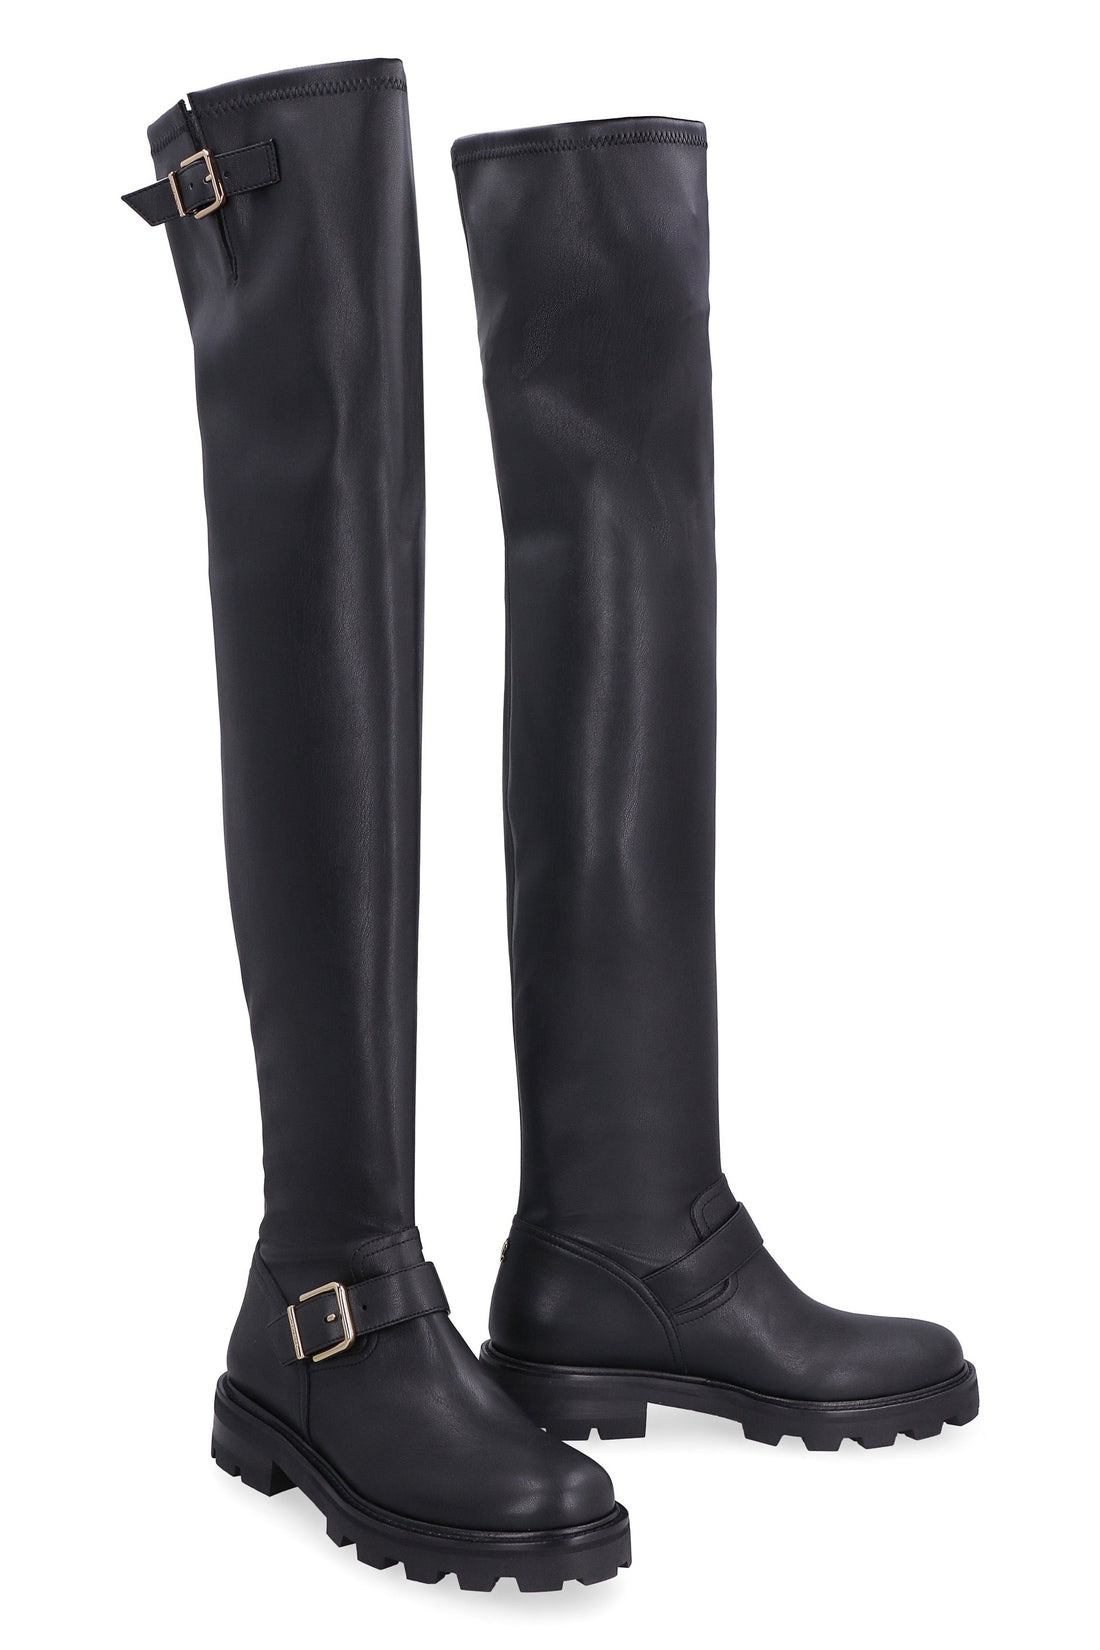 Jimmy Choo-OUTLET-SALE-Biker over-the-knee boots-ARCHIVIST